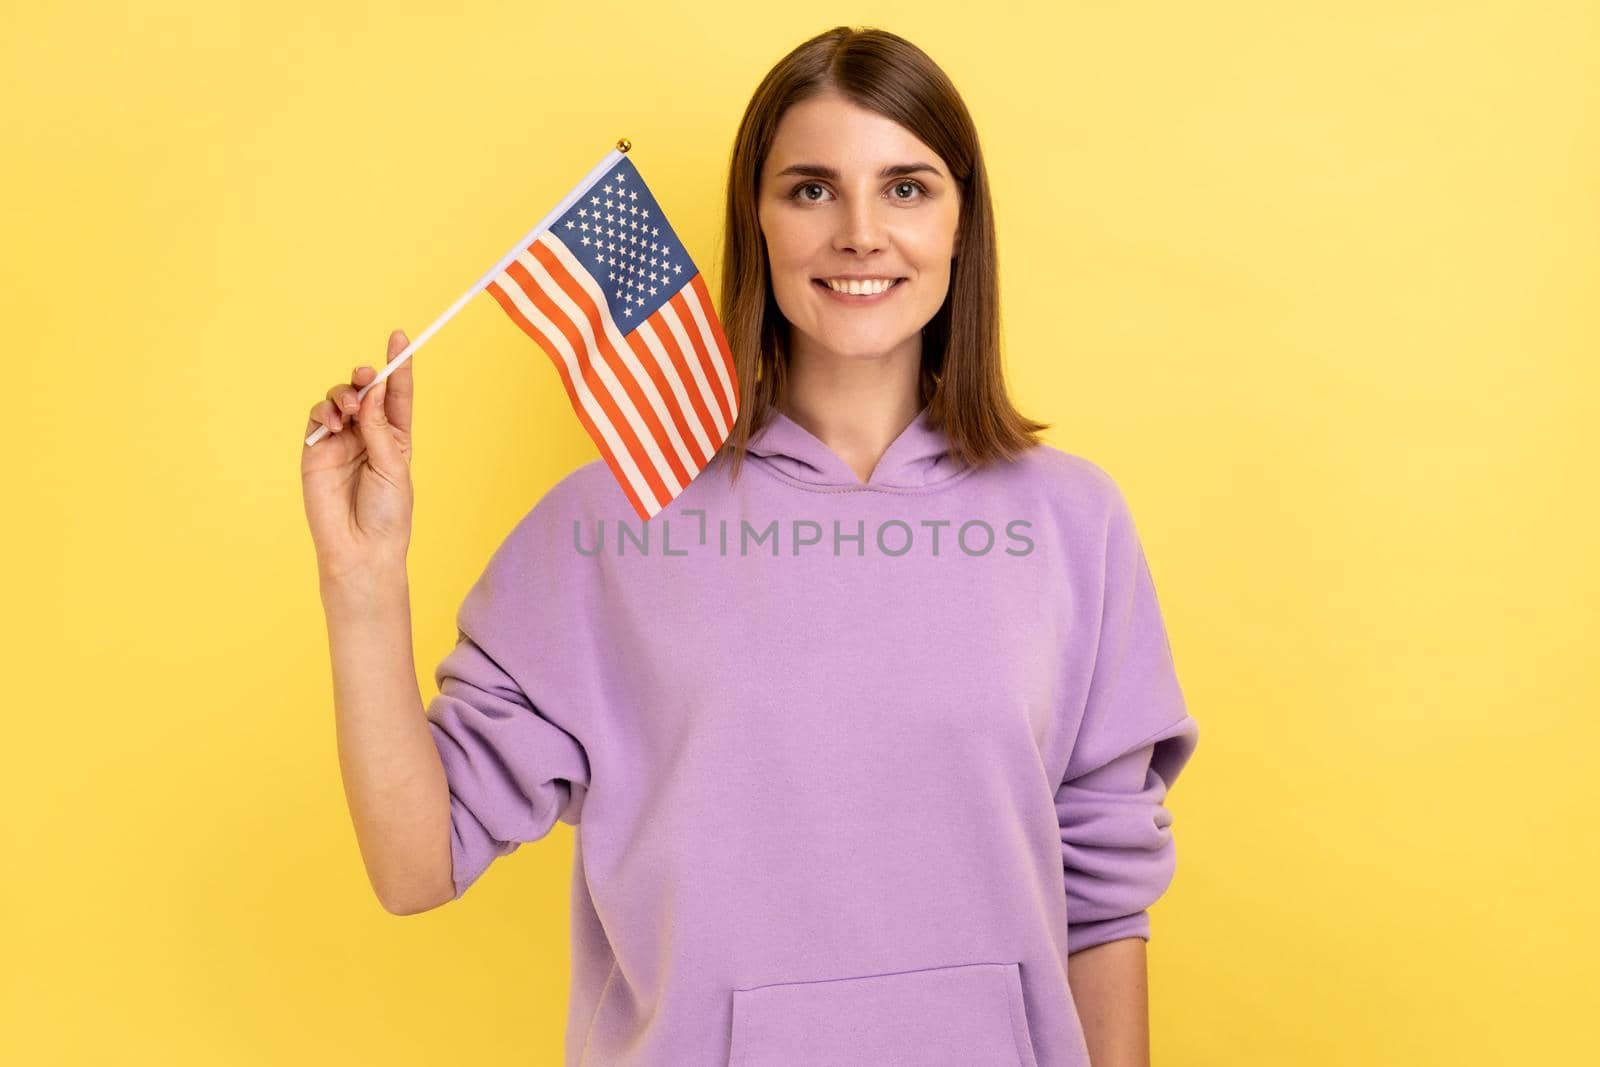 Portrait of delighted positive young woman standing and waving american flag, celebrating national holiday, wearing purple hoodie. Indoor studio shot isolated on yellow background.